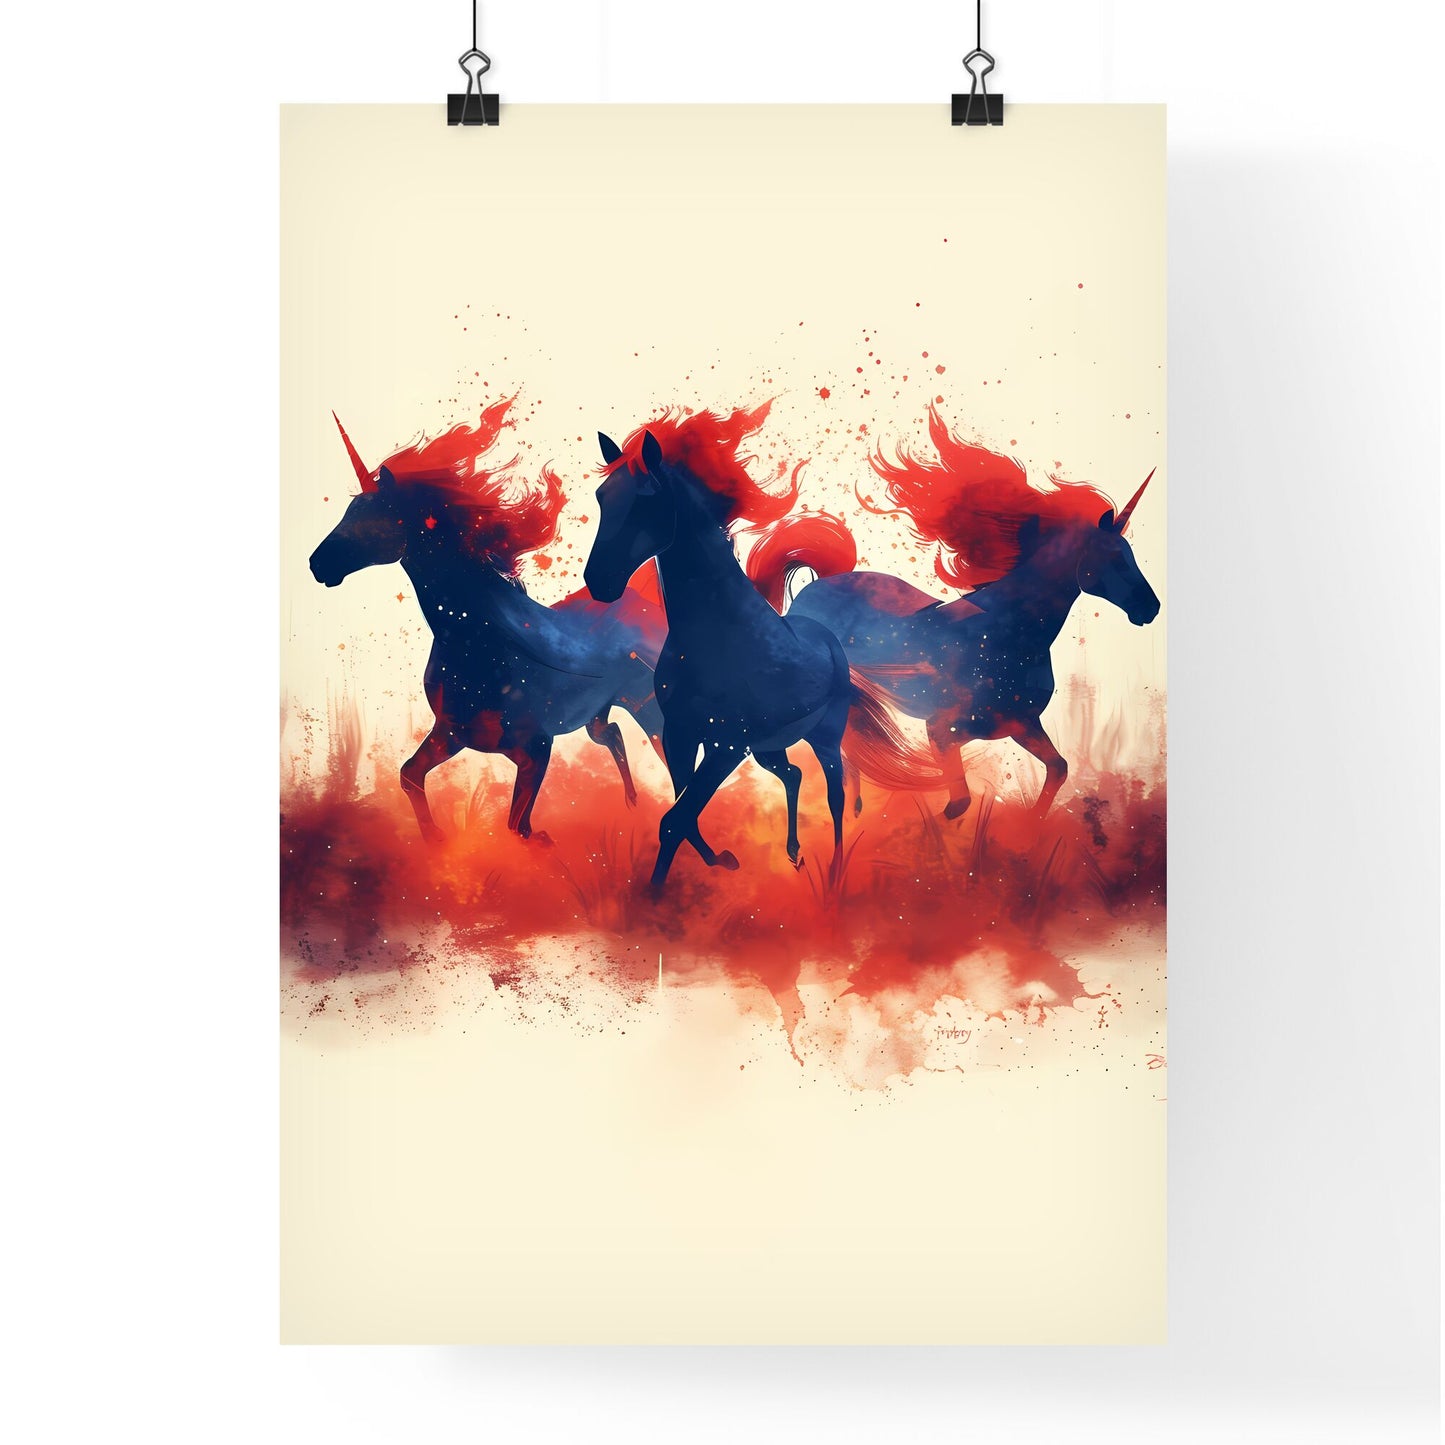 With the text Happy Birthday in whimsical script font - Art print of a group of horses running with red manes Default Title